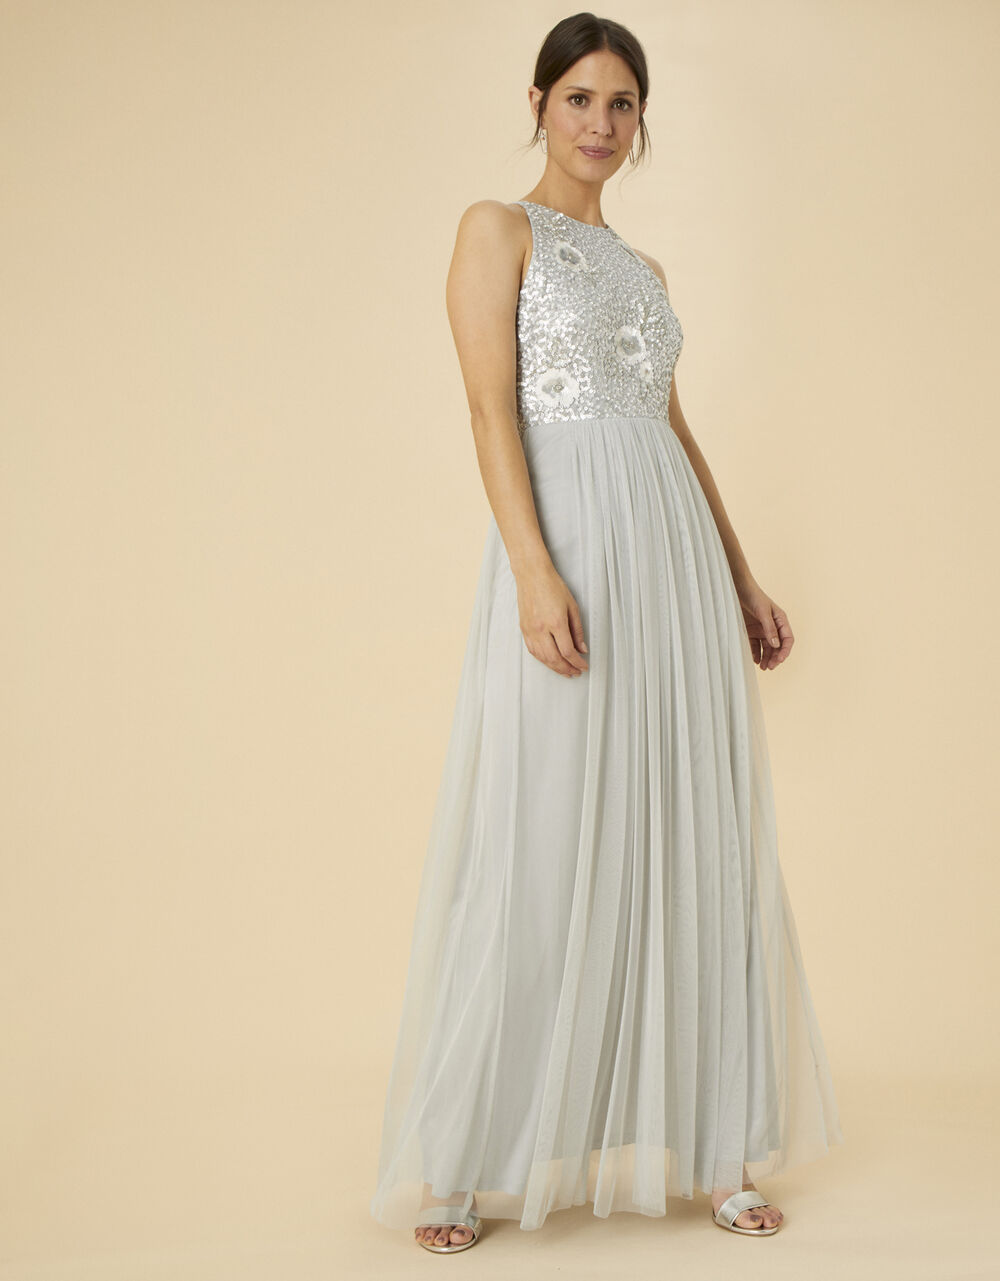 Women Dresses | Adrianna Embellished Maxi Dress in Recycled Polyester Blue - NX62078